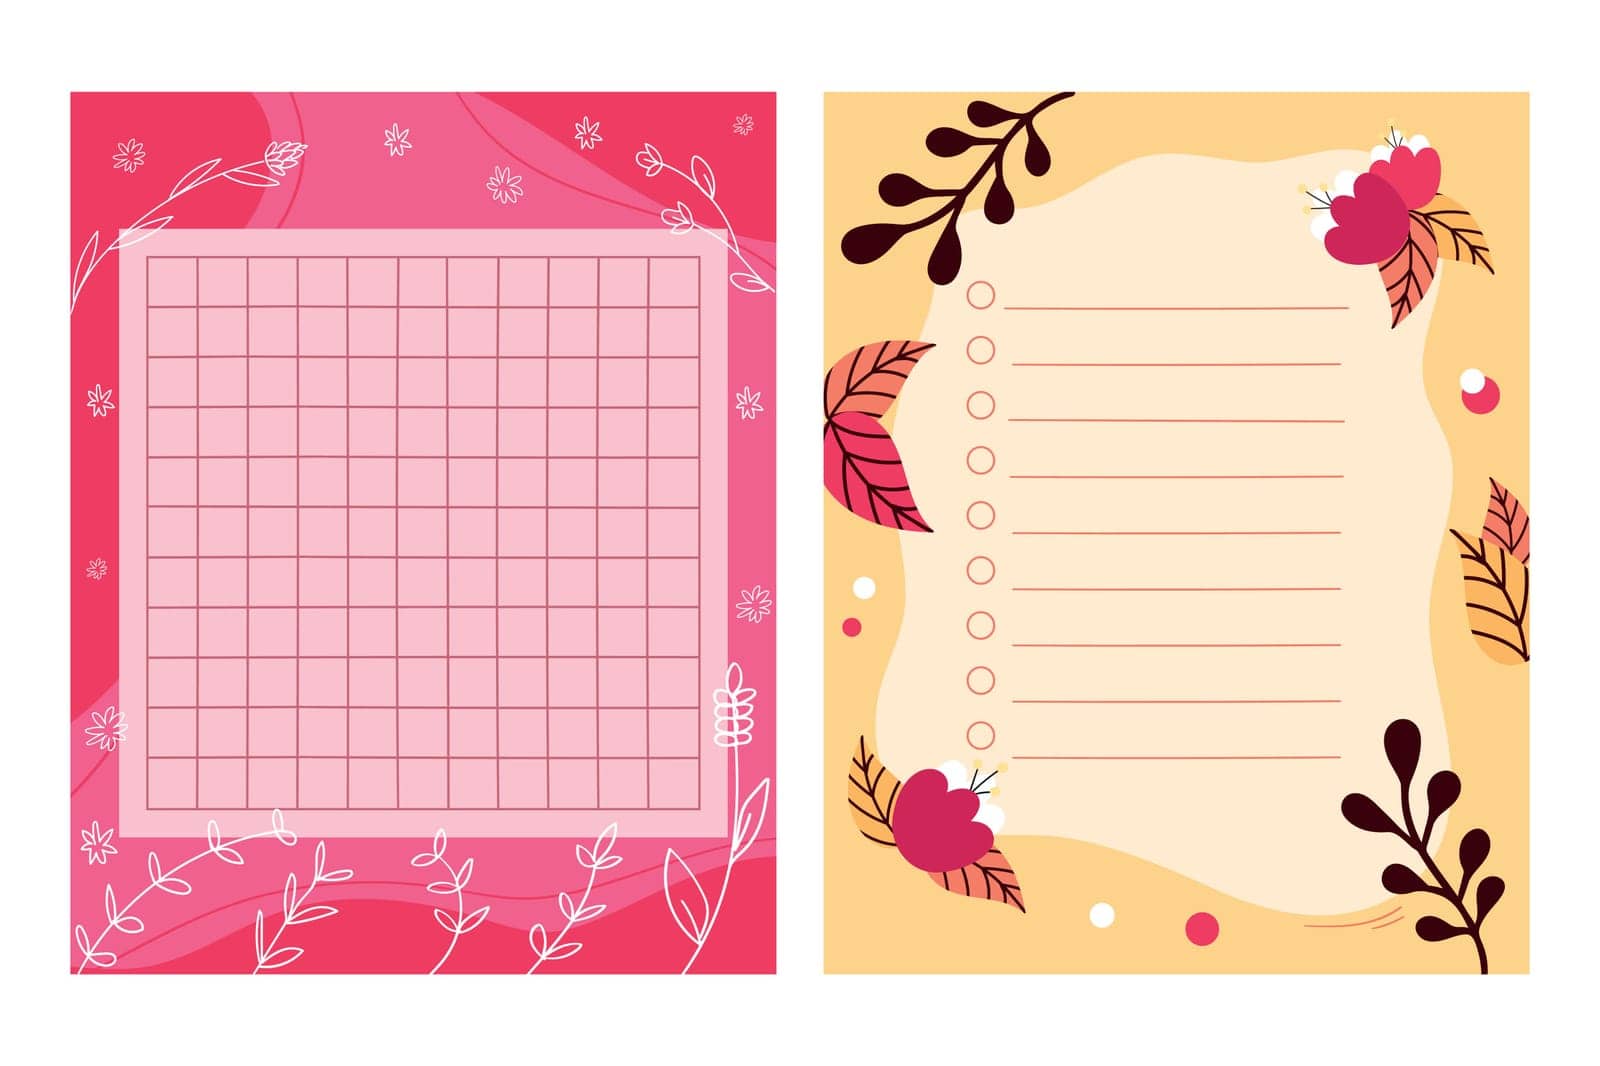 Paper notes set decorated with leaves and flowers. Templates for memo, reminder or to do list. Vector illustration